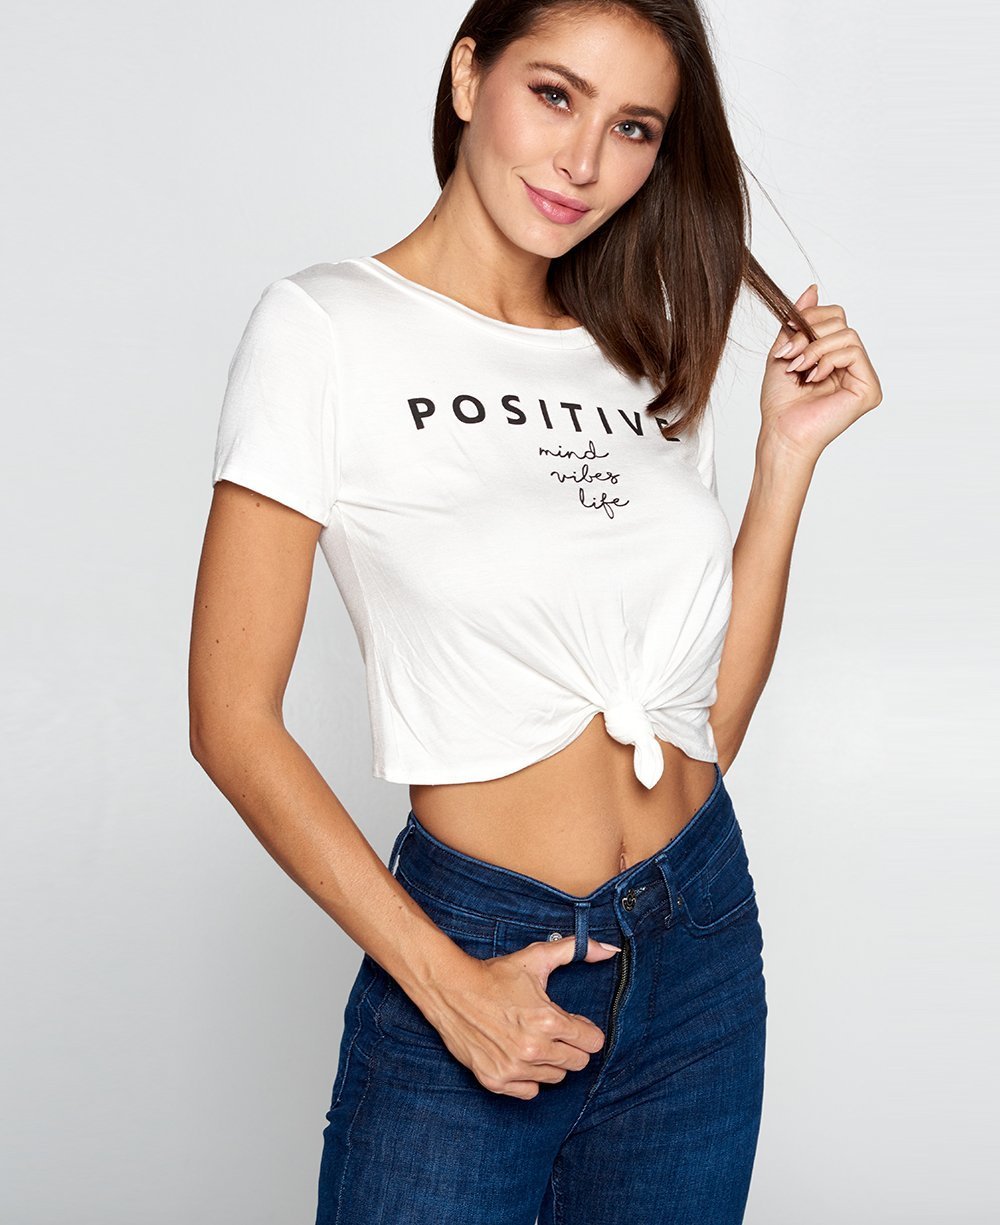 Positive Mind Knotted Crop Top - Apparel White Large